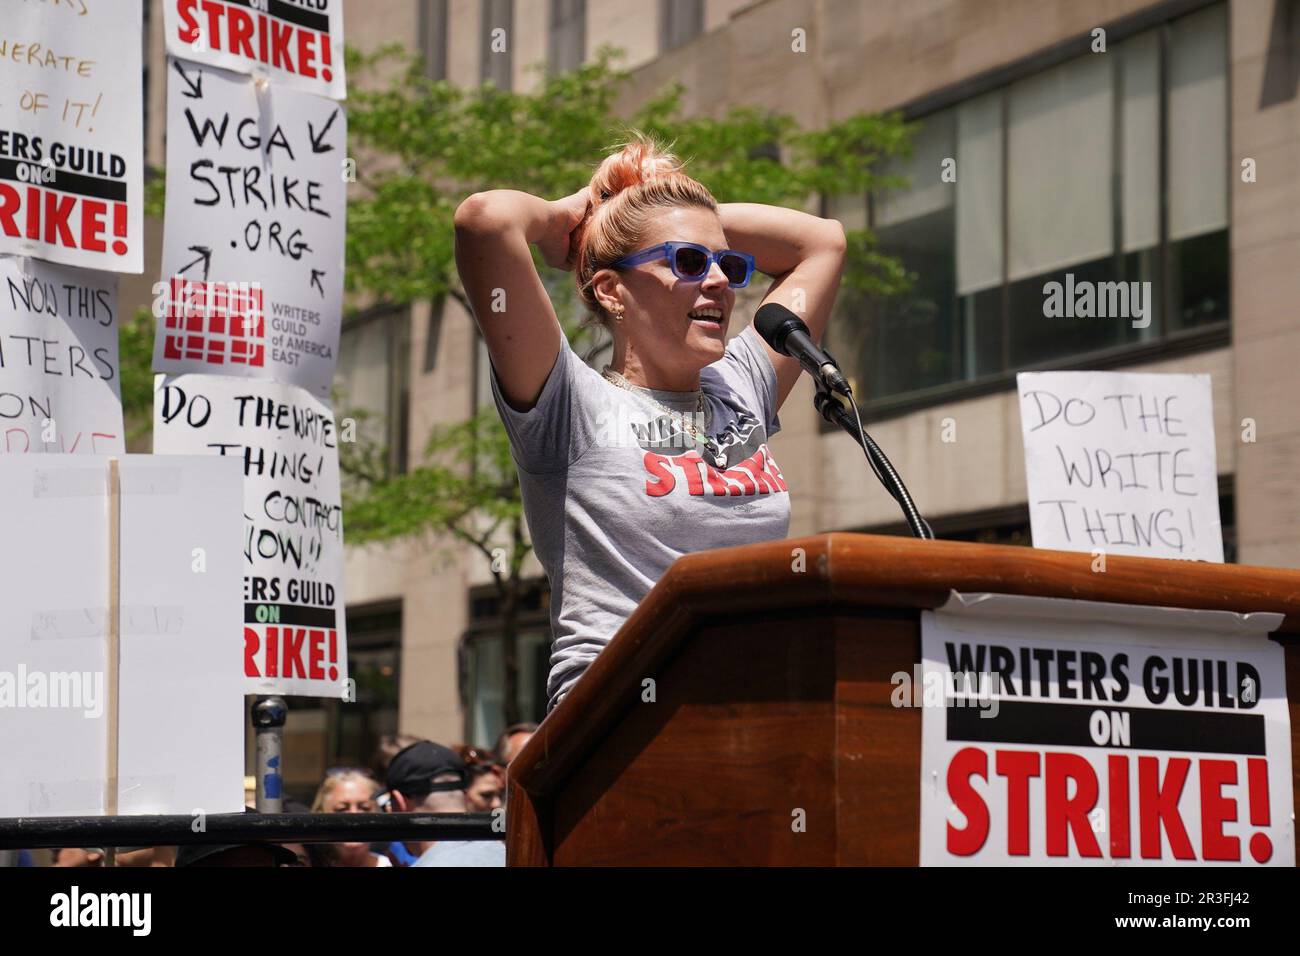 New York, NY, USA. 23rd May, 2023. Busy Philipps in attendance for The Writers Guild of America WGA Rally at the Rock, NBCUniversal offices at 30 Rock, New York, NY May 23, 2023. Credit: Kristin Callahan/Everett Collection/Alamy Live News Stock Photo